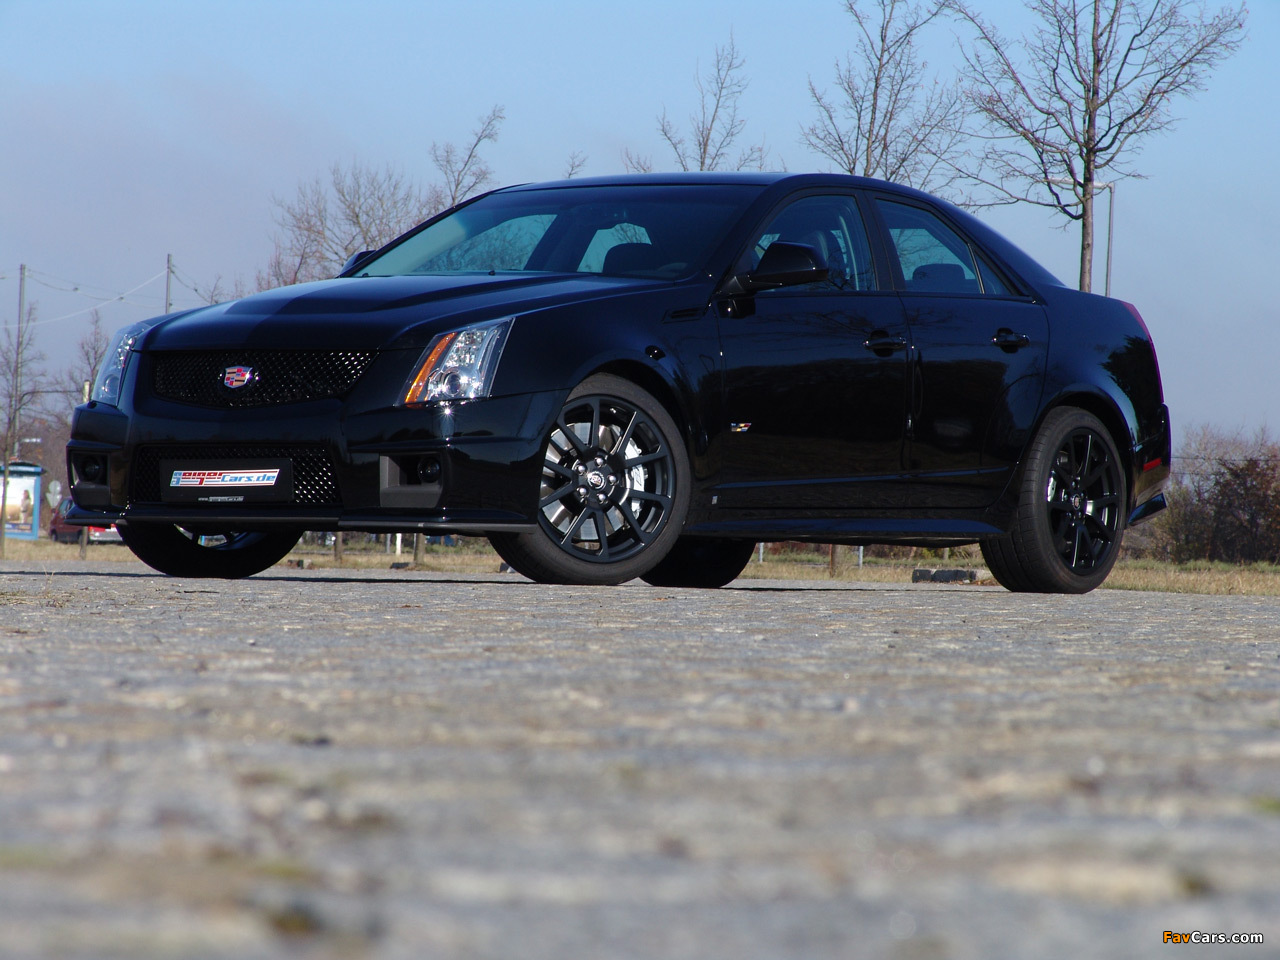 Geiger Cadillac CTS-V Brute Force 2009 photos (1280 x 960)